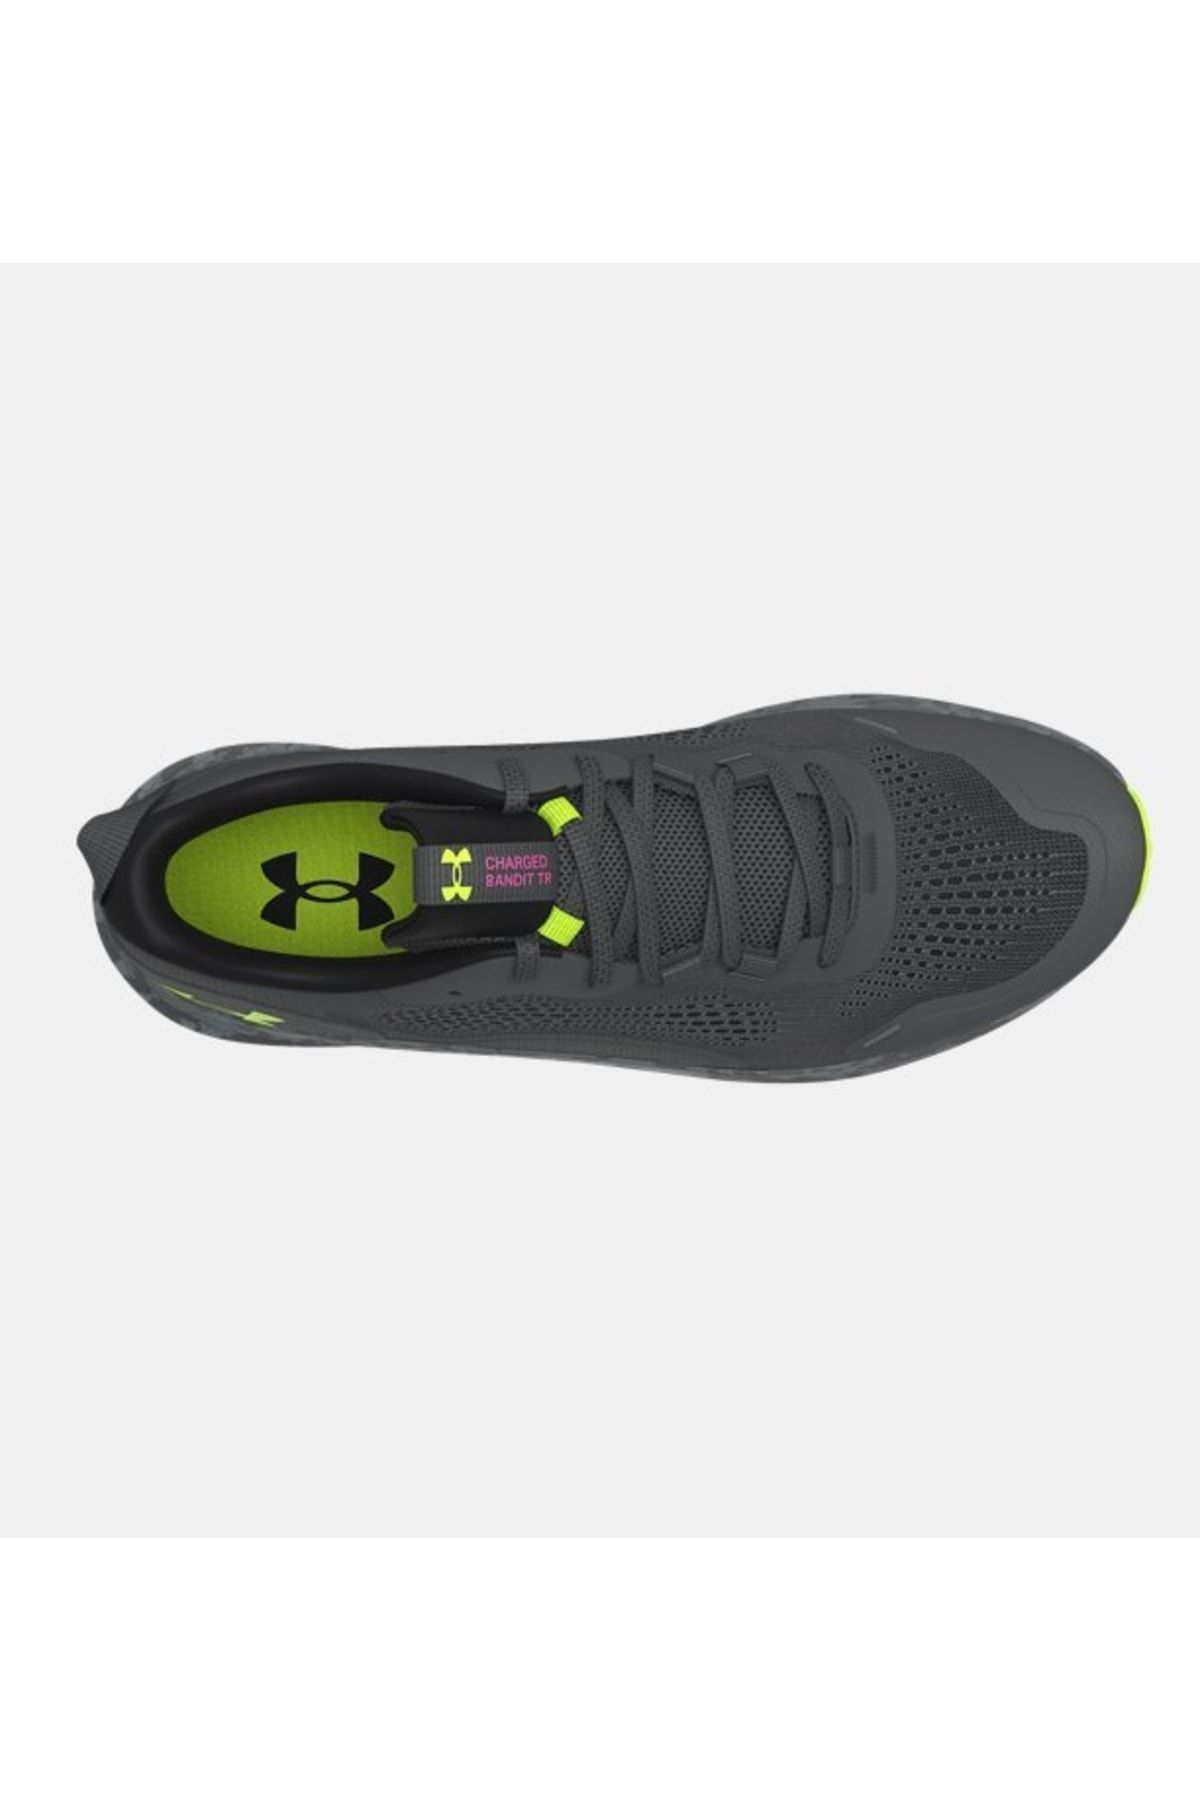 Under Armour Charged Bandit TR 2 UA Black Green Men Trail Running  3024186-102